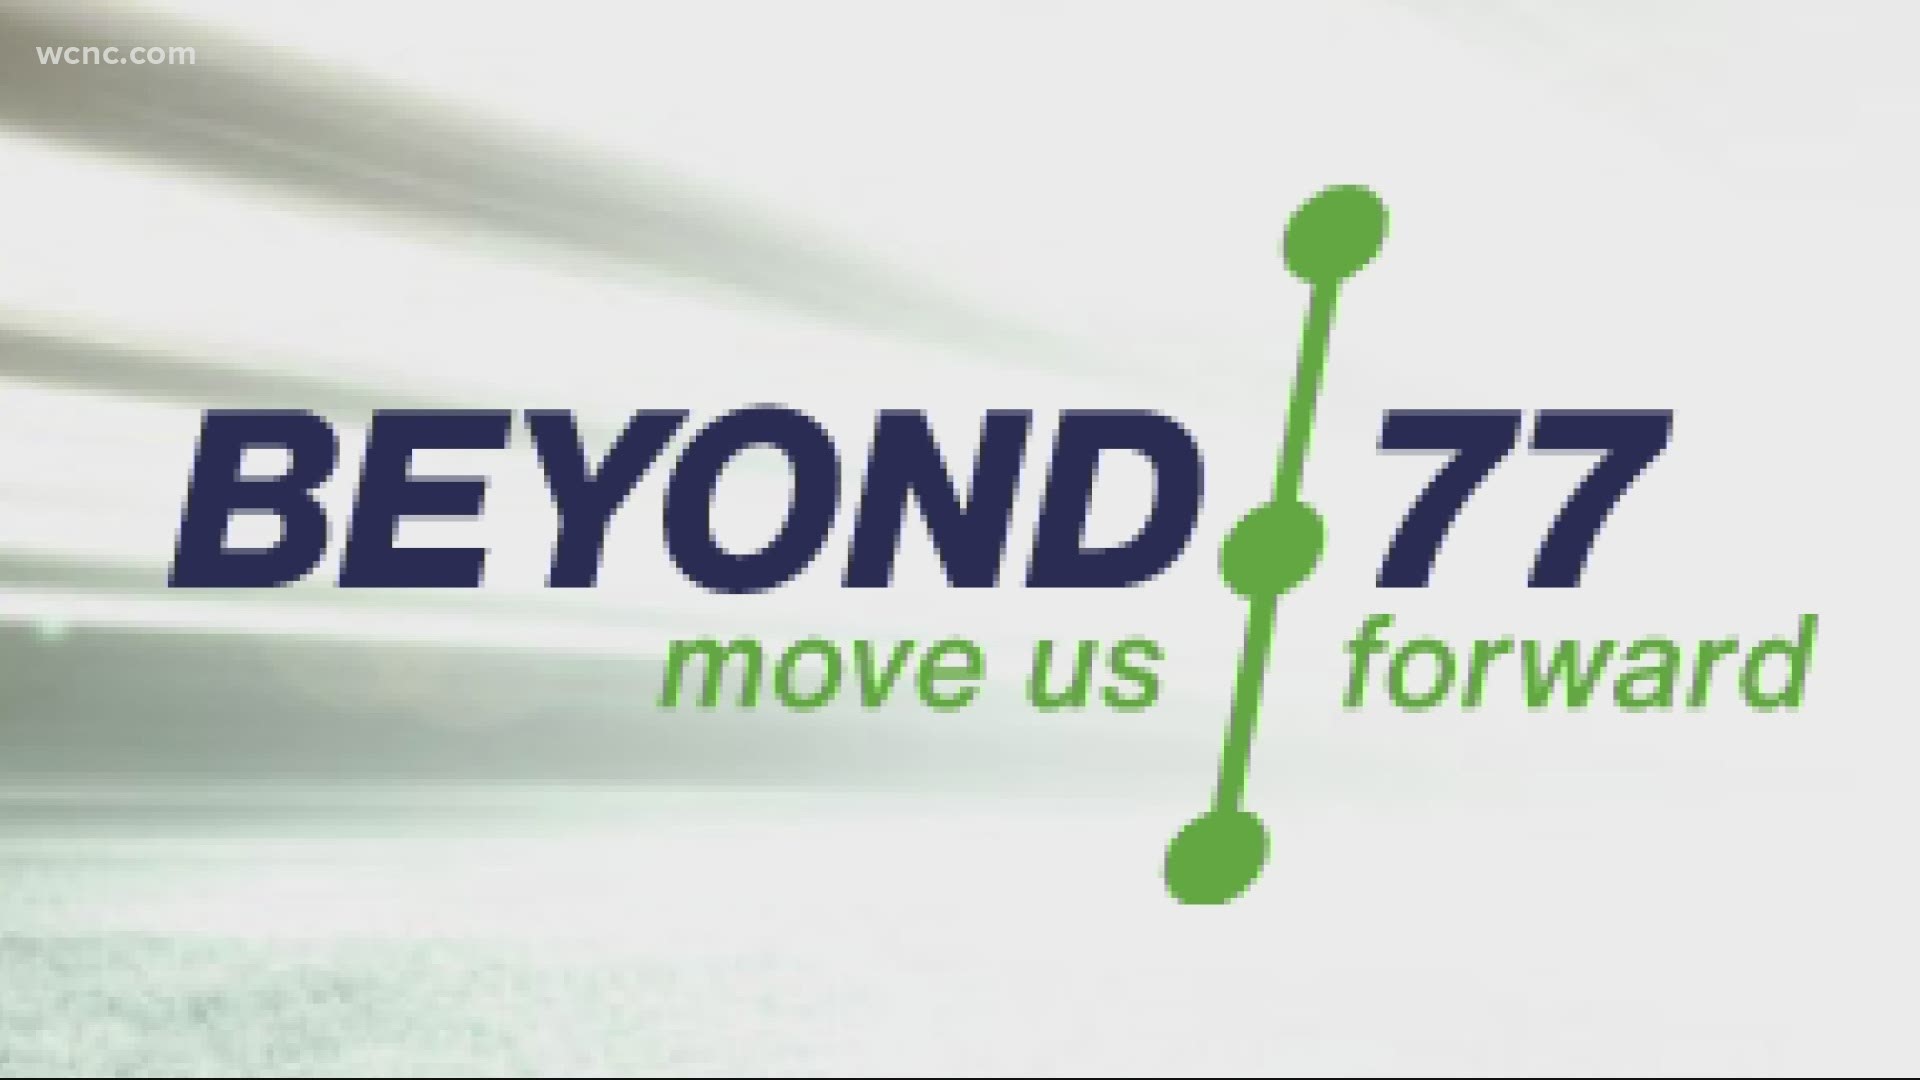 The Charlotte Regional Transportation Planning Organization has developed more than 170 potential solutions for the I-77 Corridor from Statesville to Rock Hill.